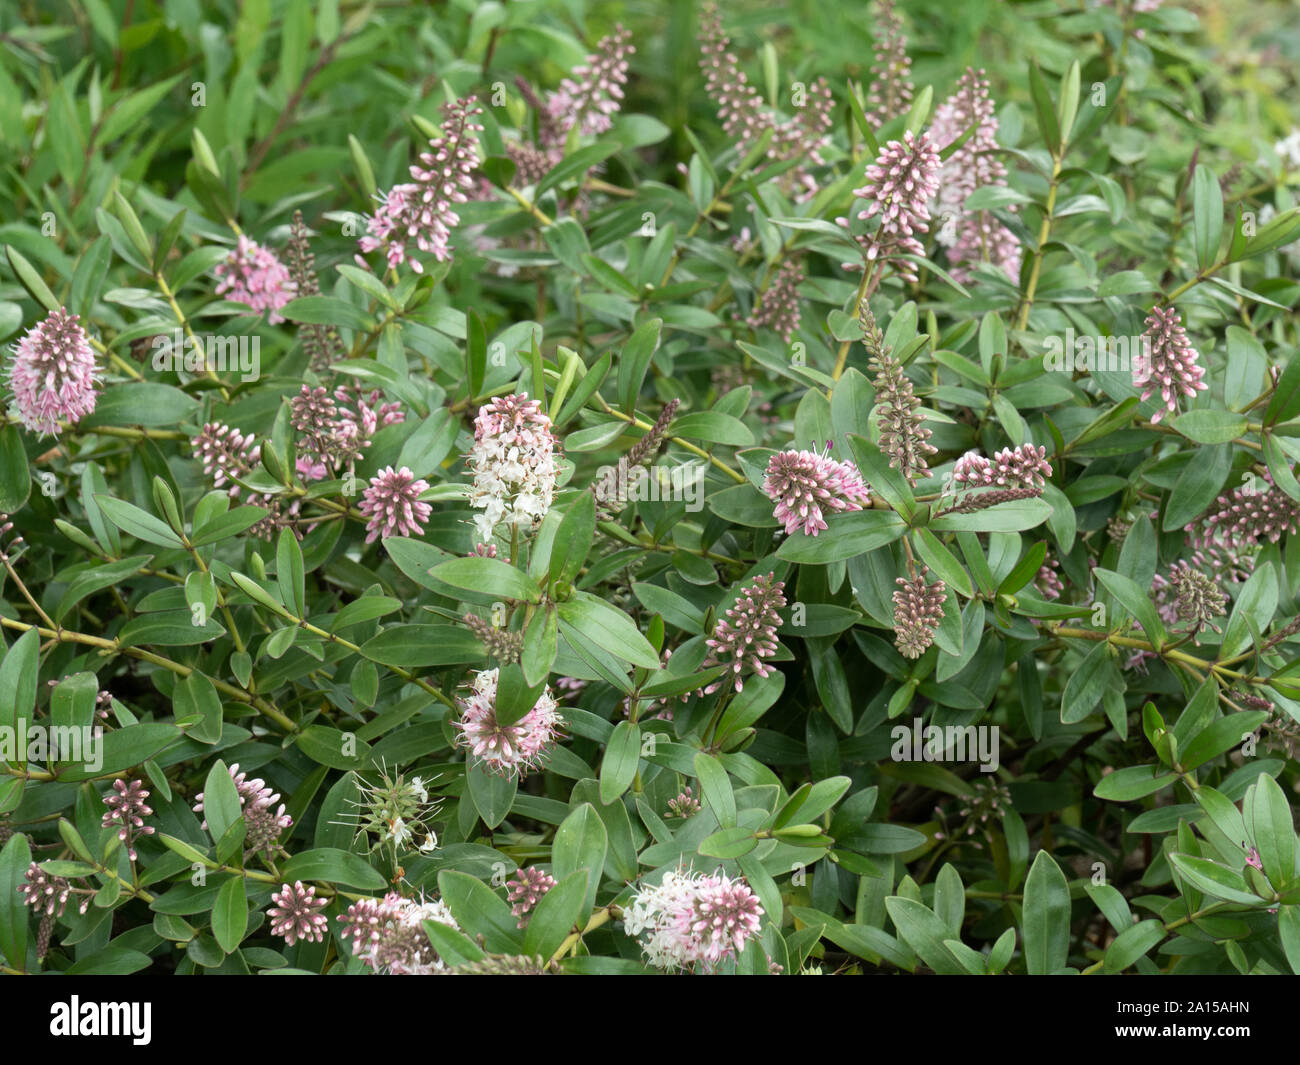 A flowering plant of Hebe Nicola's Blush showing the pale pink flowers which fade to white Stock Photo